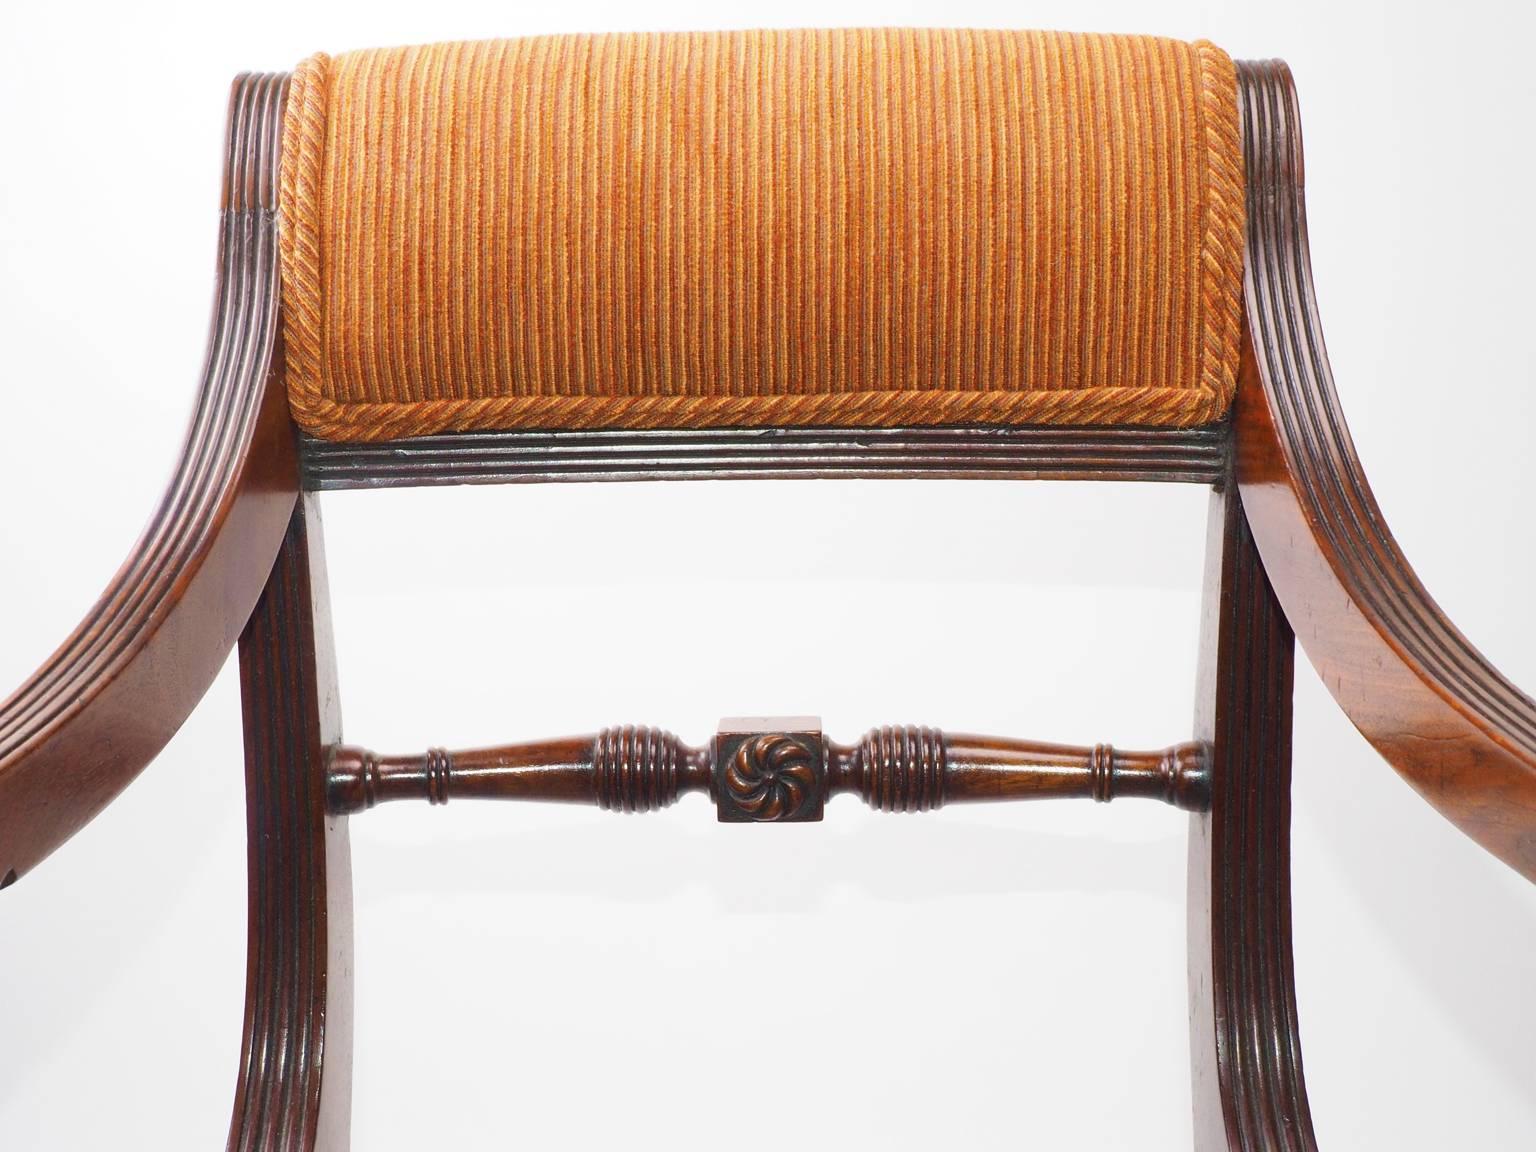 Cane Regency Sabre Legged Mahogany Elbow Chair For Sale